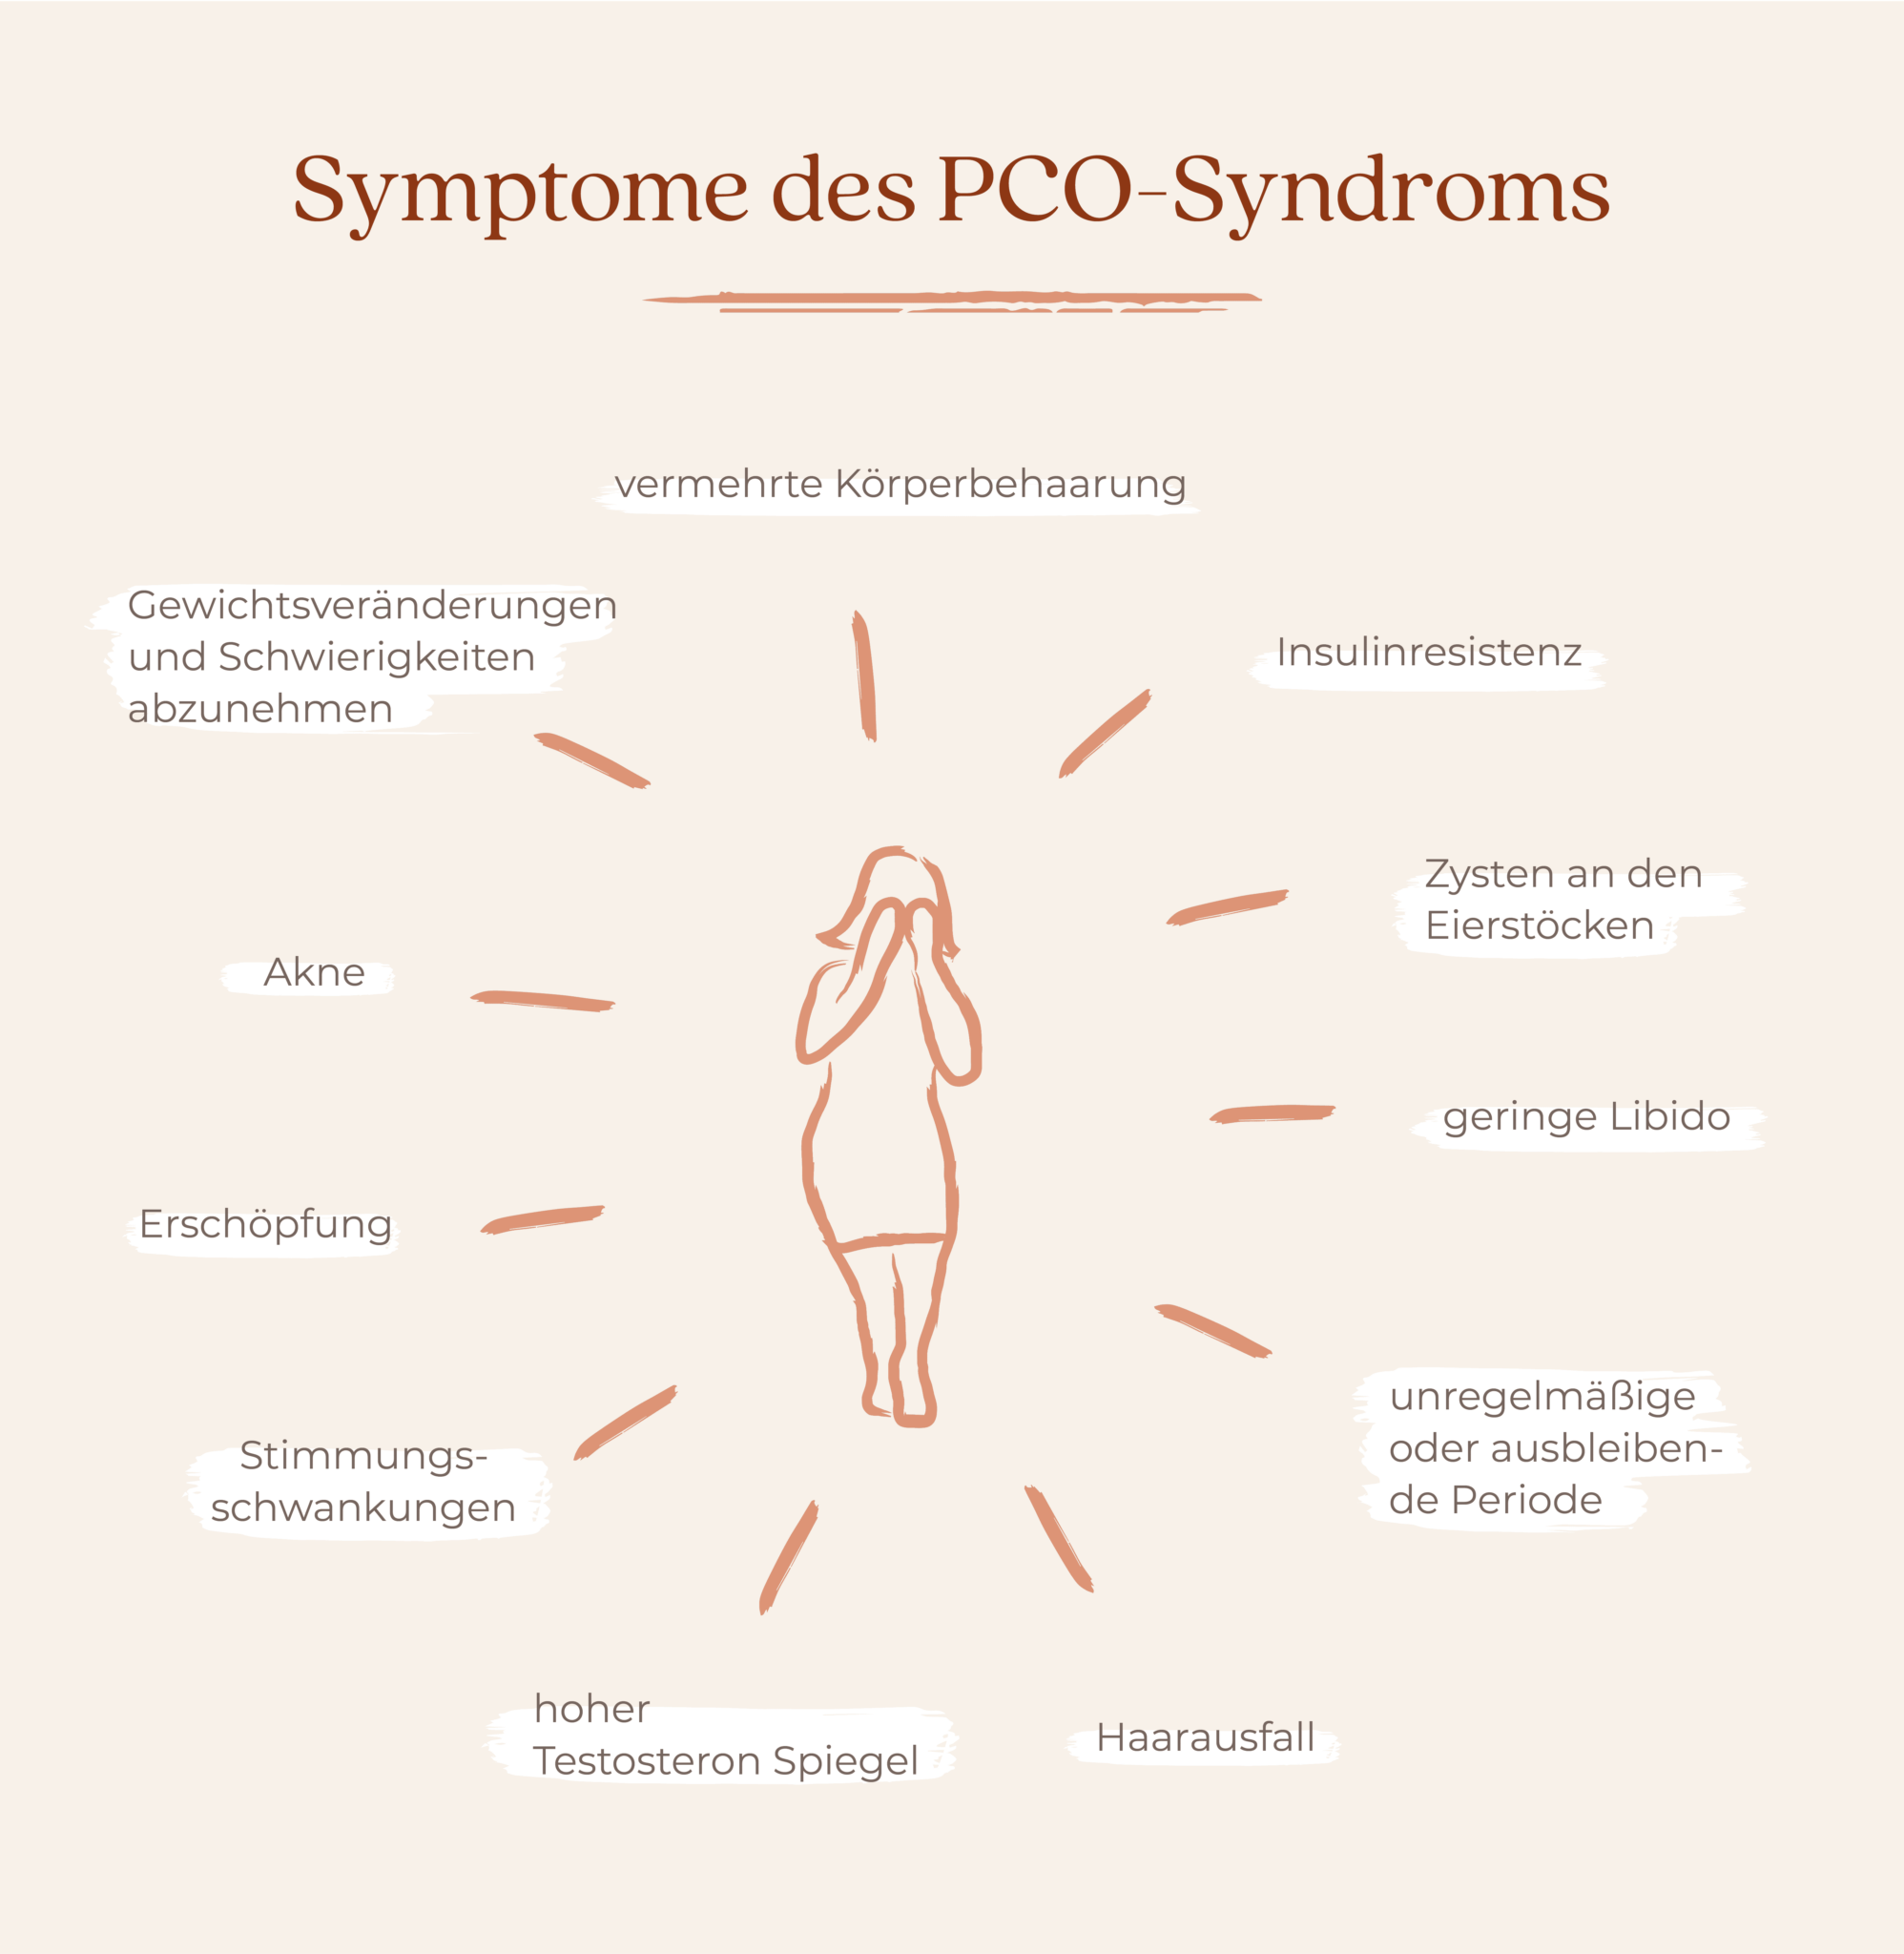 Typische Symptome des PCO-Syndrom wie Akne, Haarausfall, fehlende Periode...